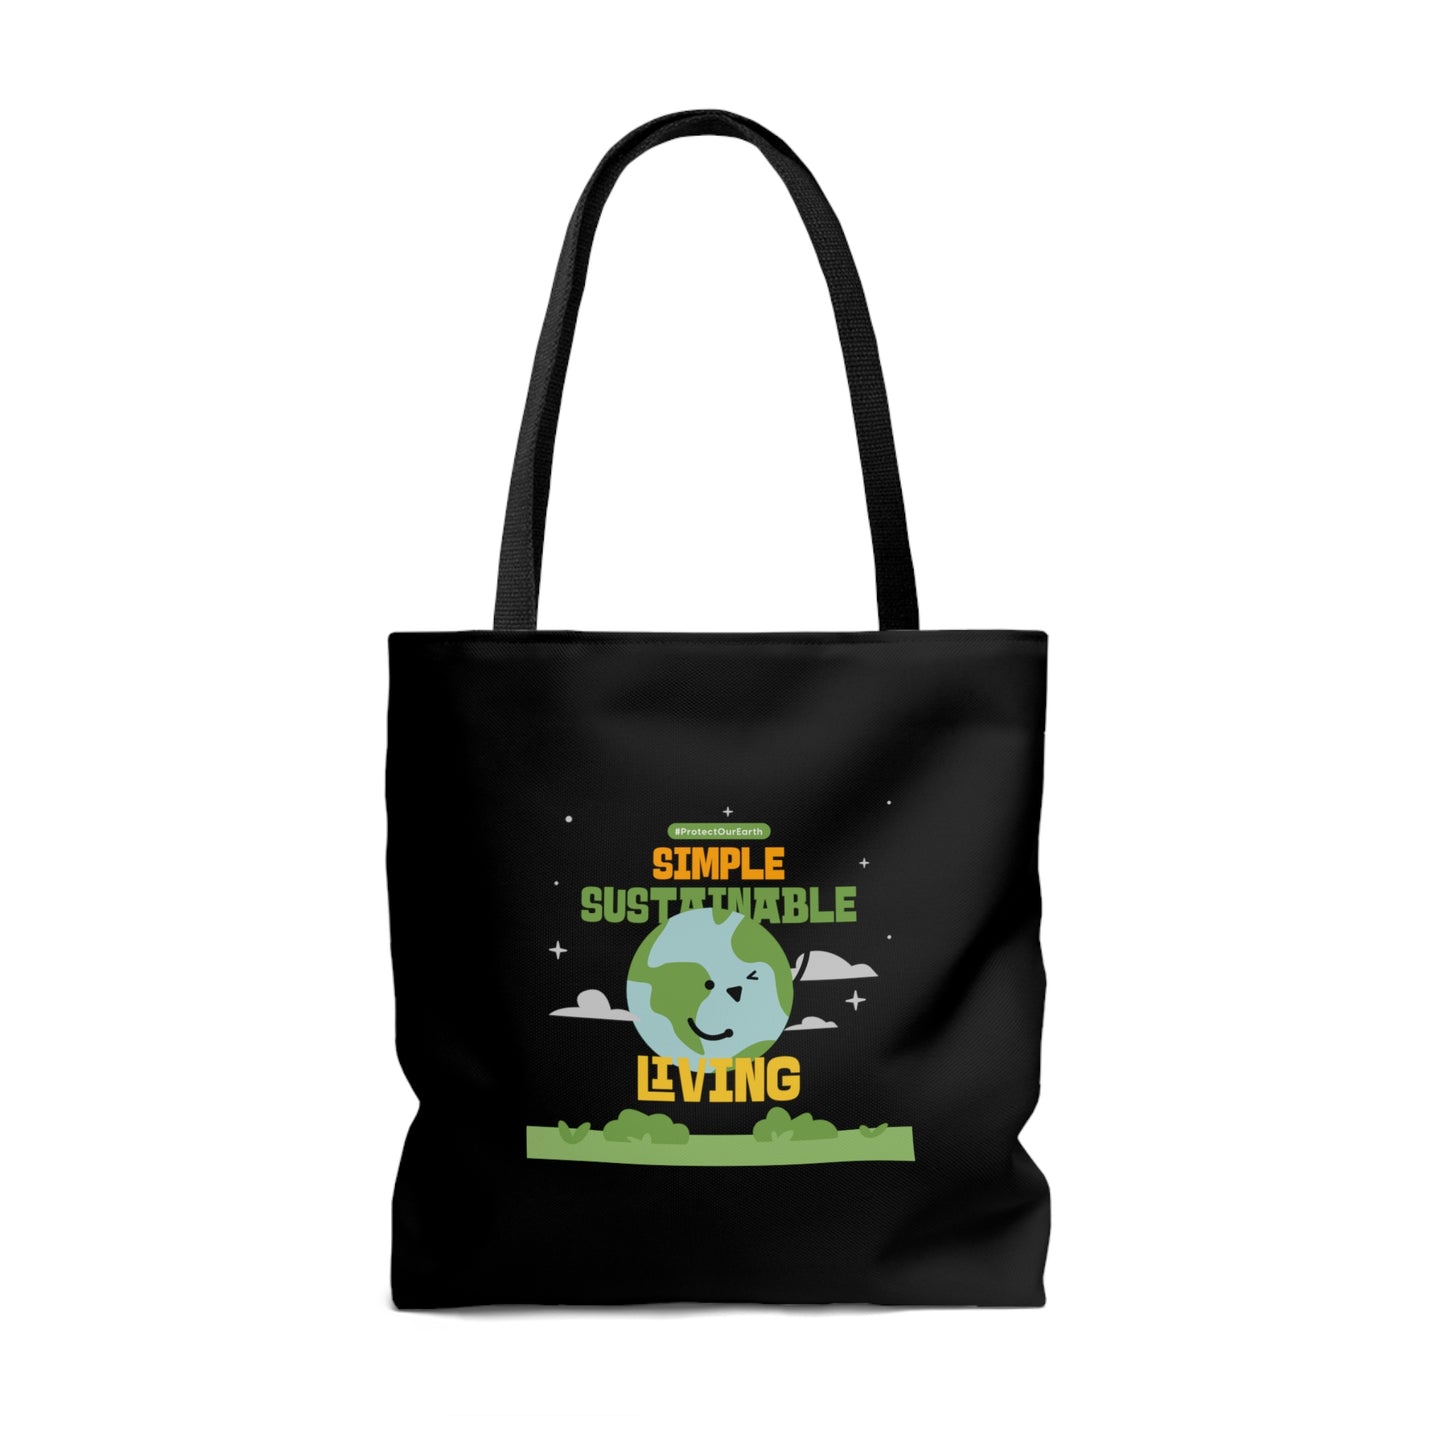 Tote bag back - all sizes